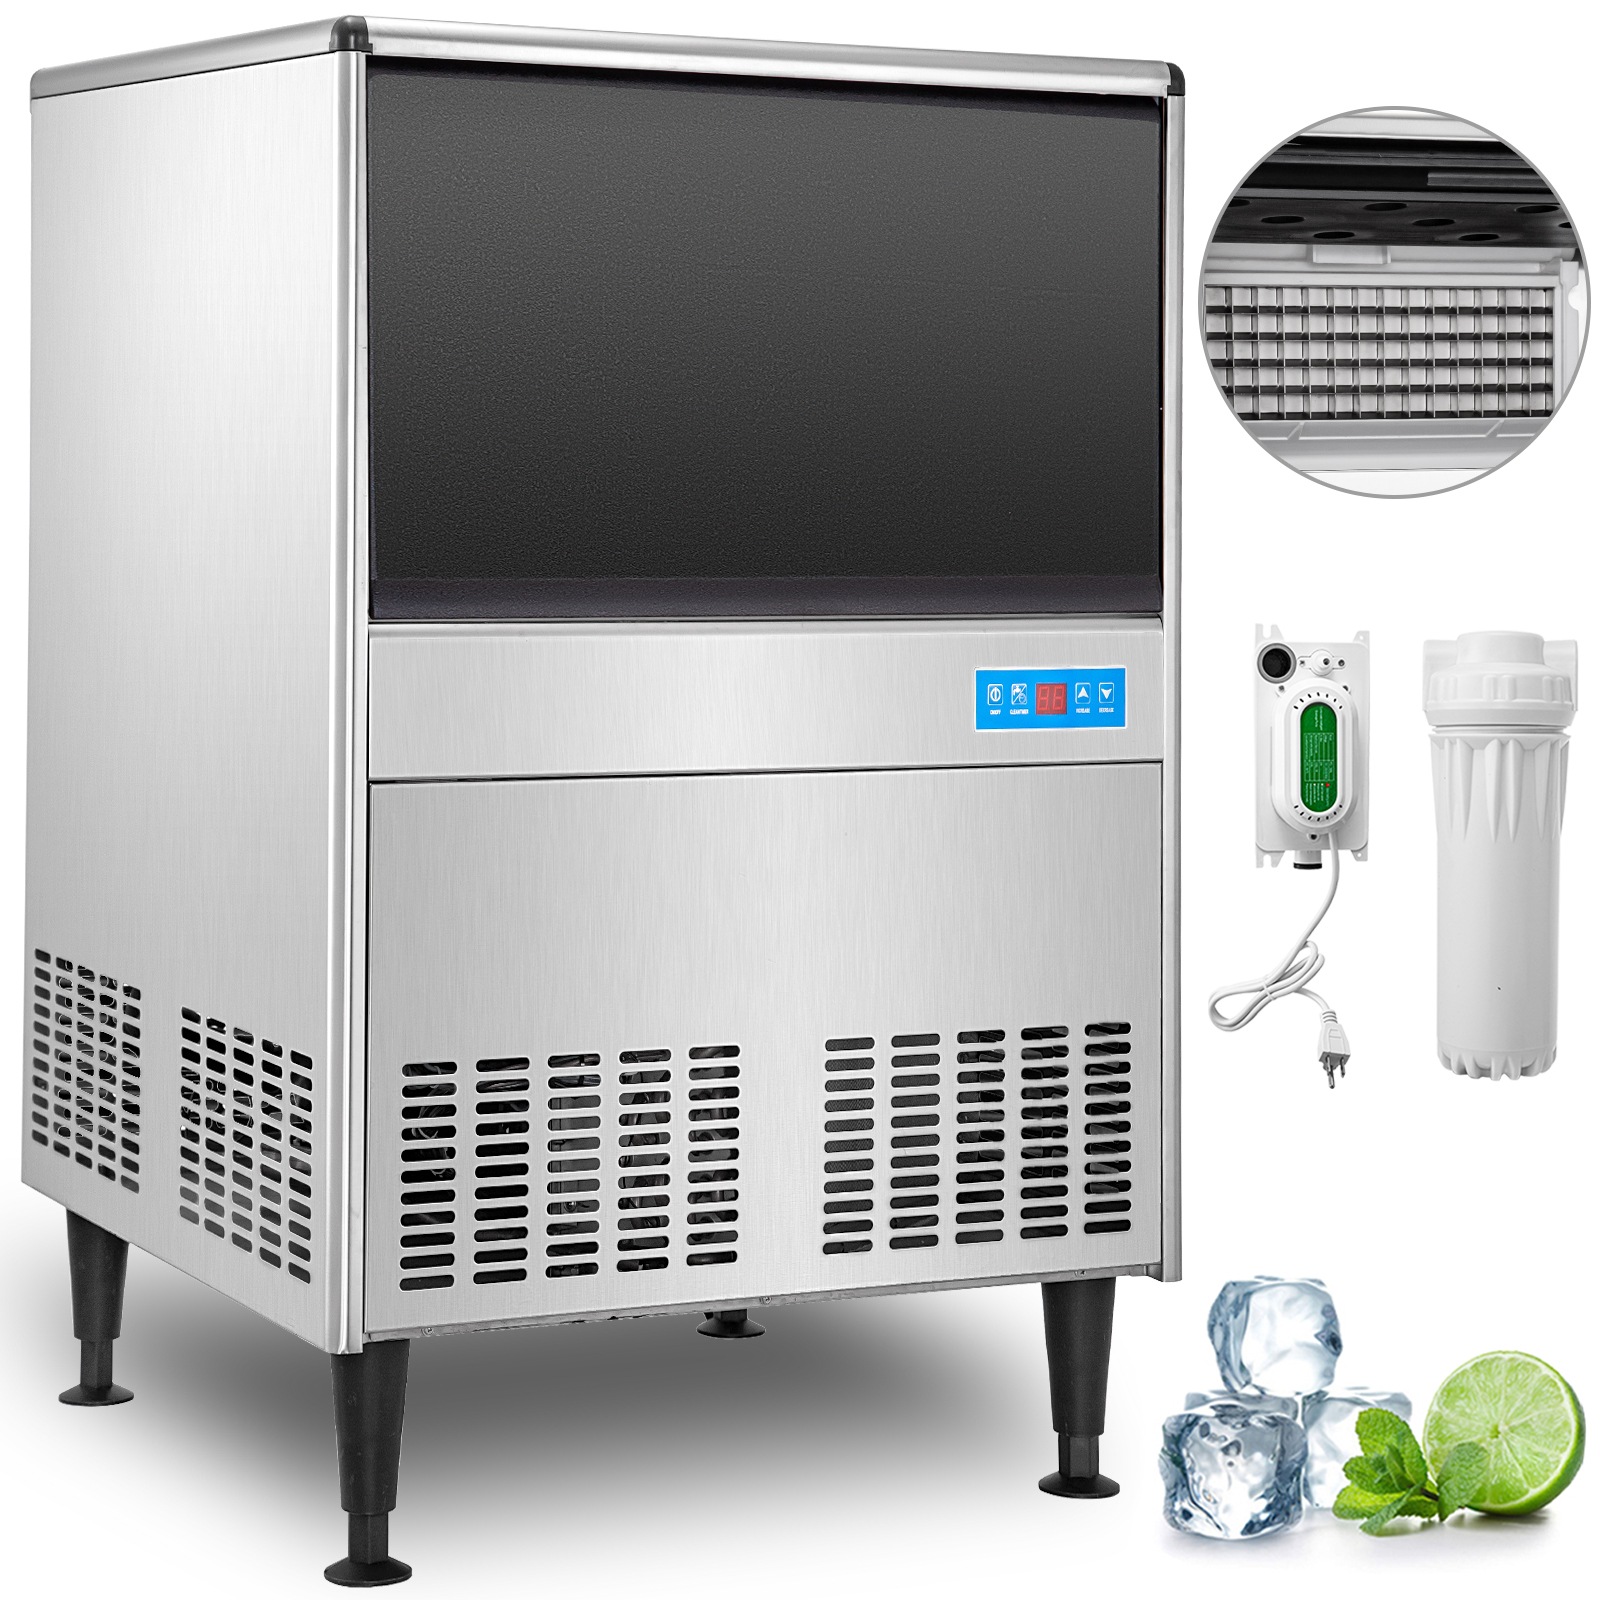 VEVOR 110V Commercial Ice Maker 220LBS/24H with 99LBS Bin, ETL Approved, Heavy Duty Stainless Steel Construction,Include Water Filter and Drain Pump от Vevor Many GEOs